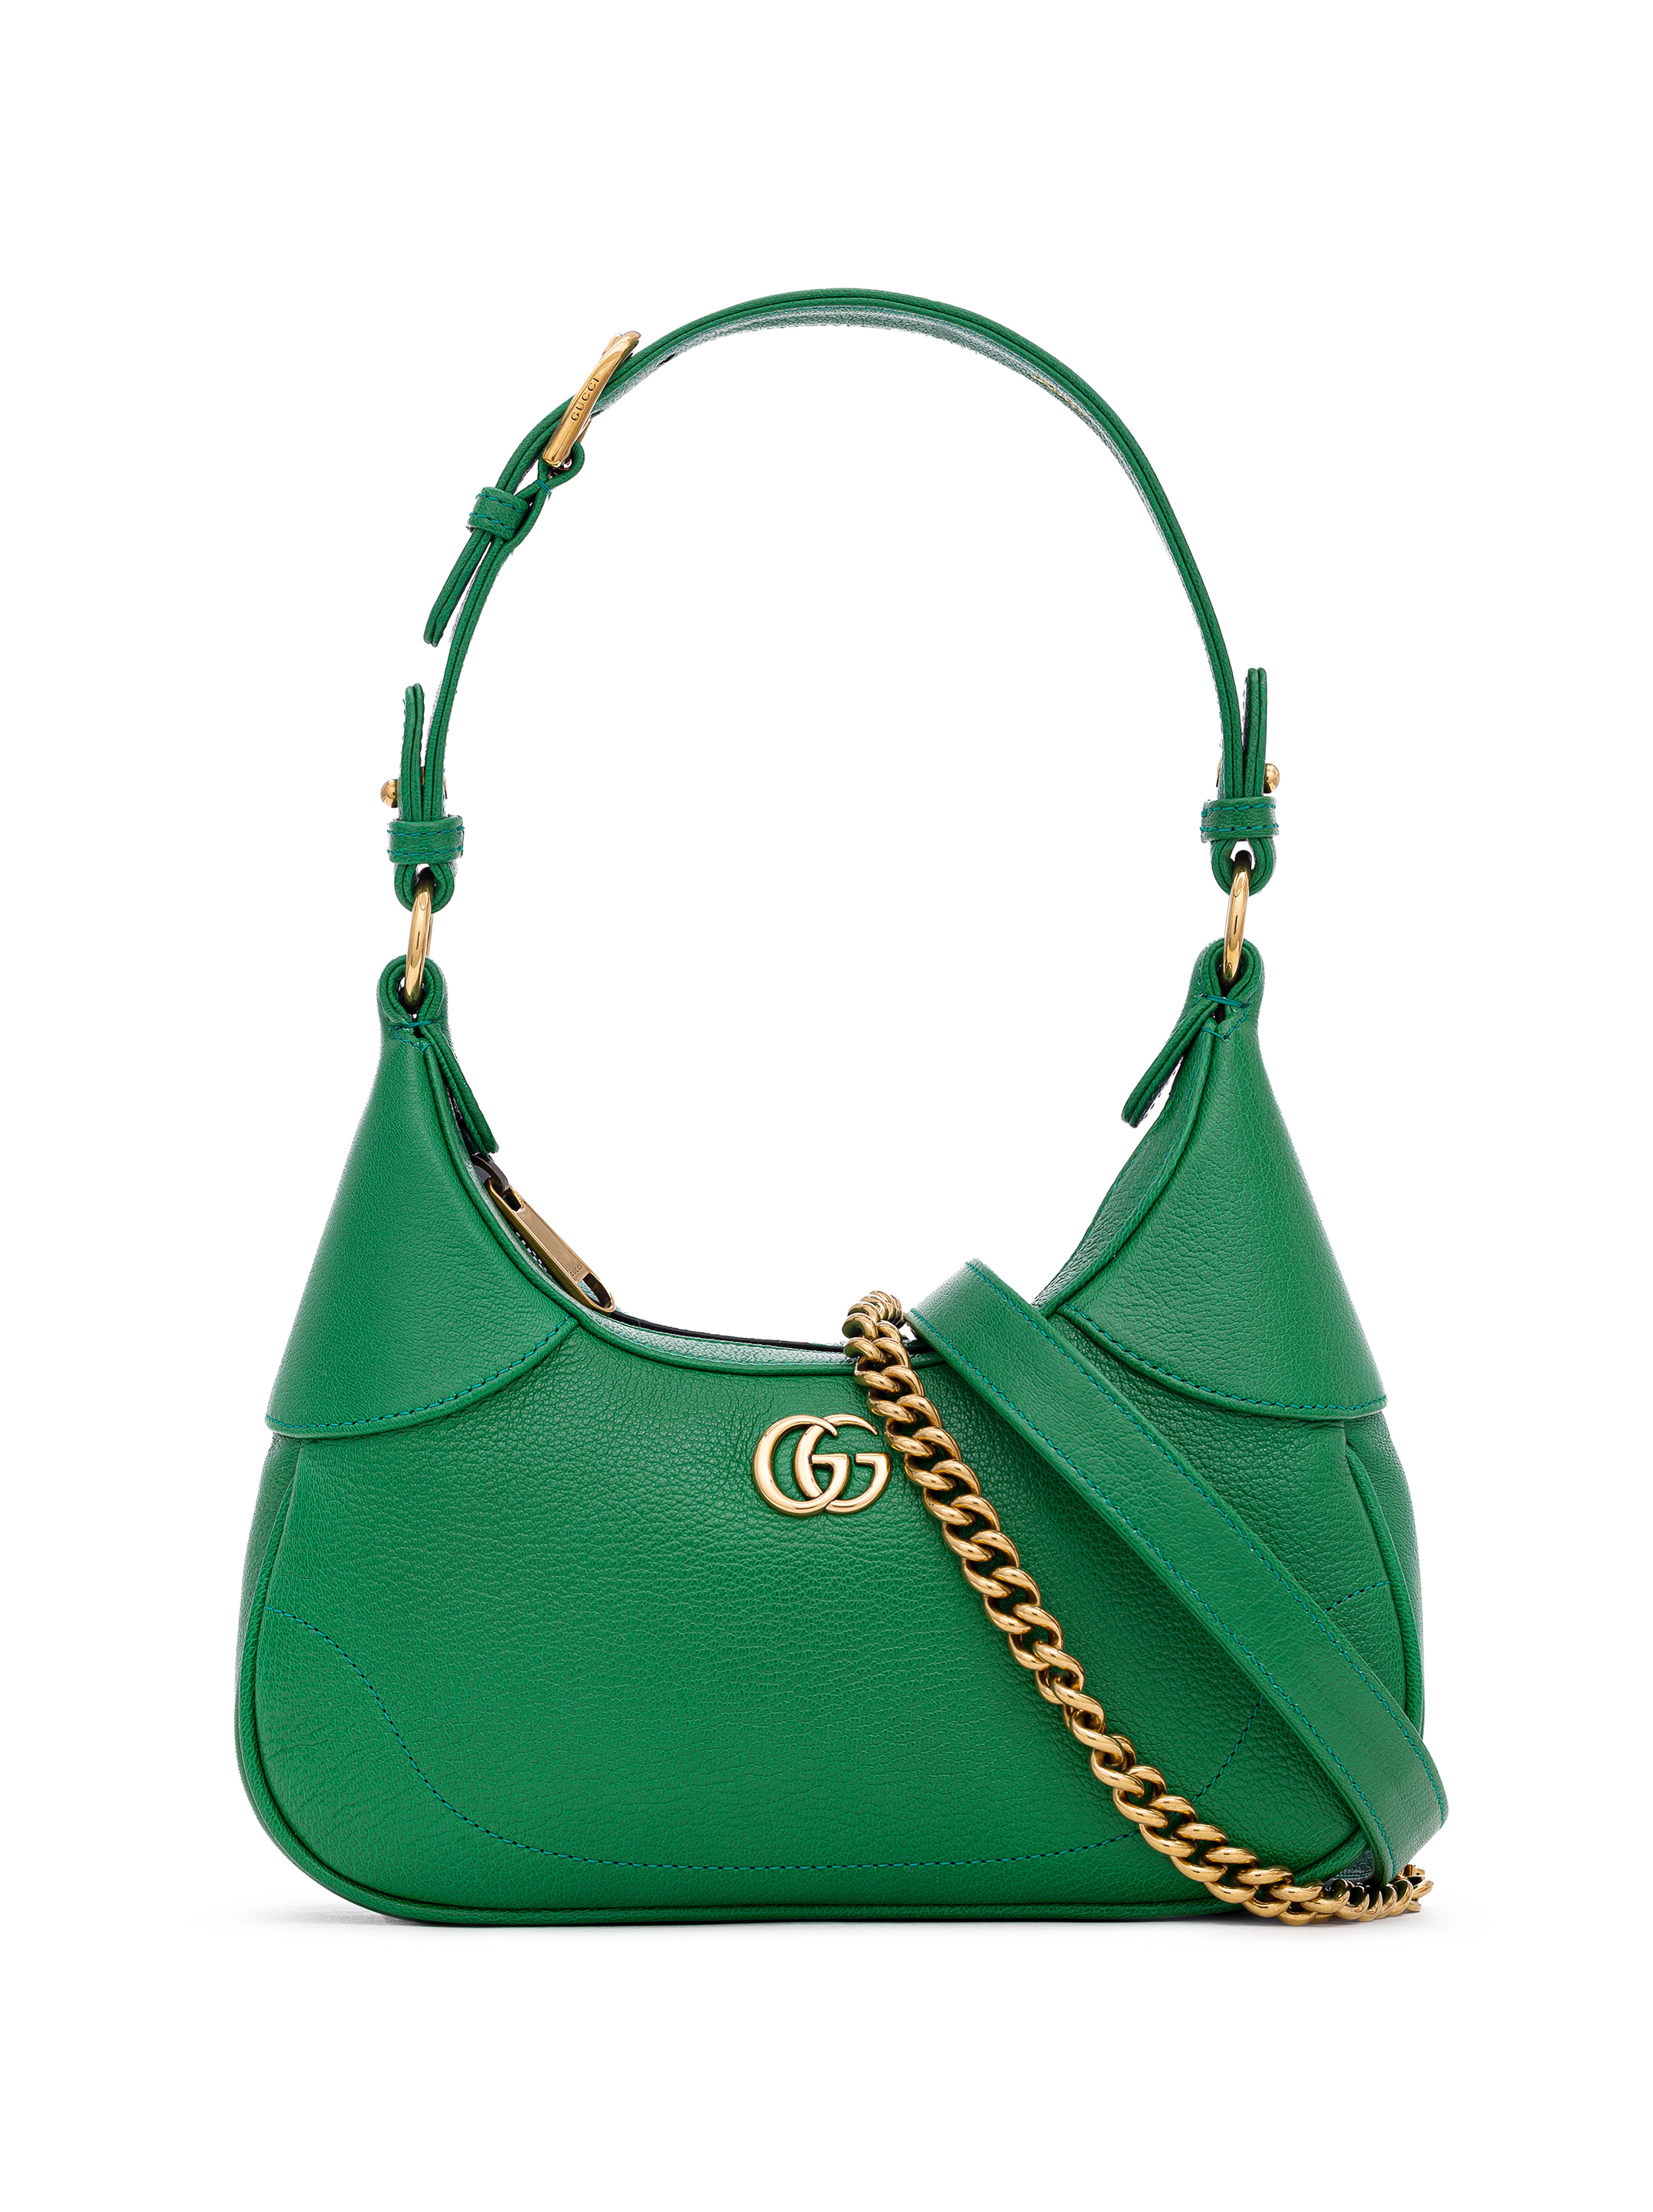 Gucci women's Aphrodite hobo bag - buy for 886600 KZT in the official Viled  online store, art. 731817 AAA9F.3727_U_232